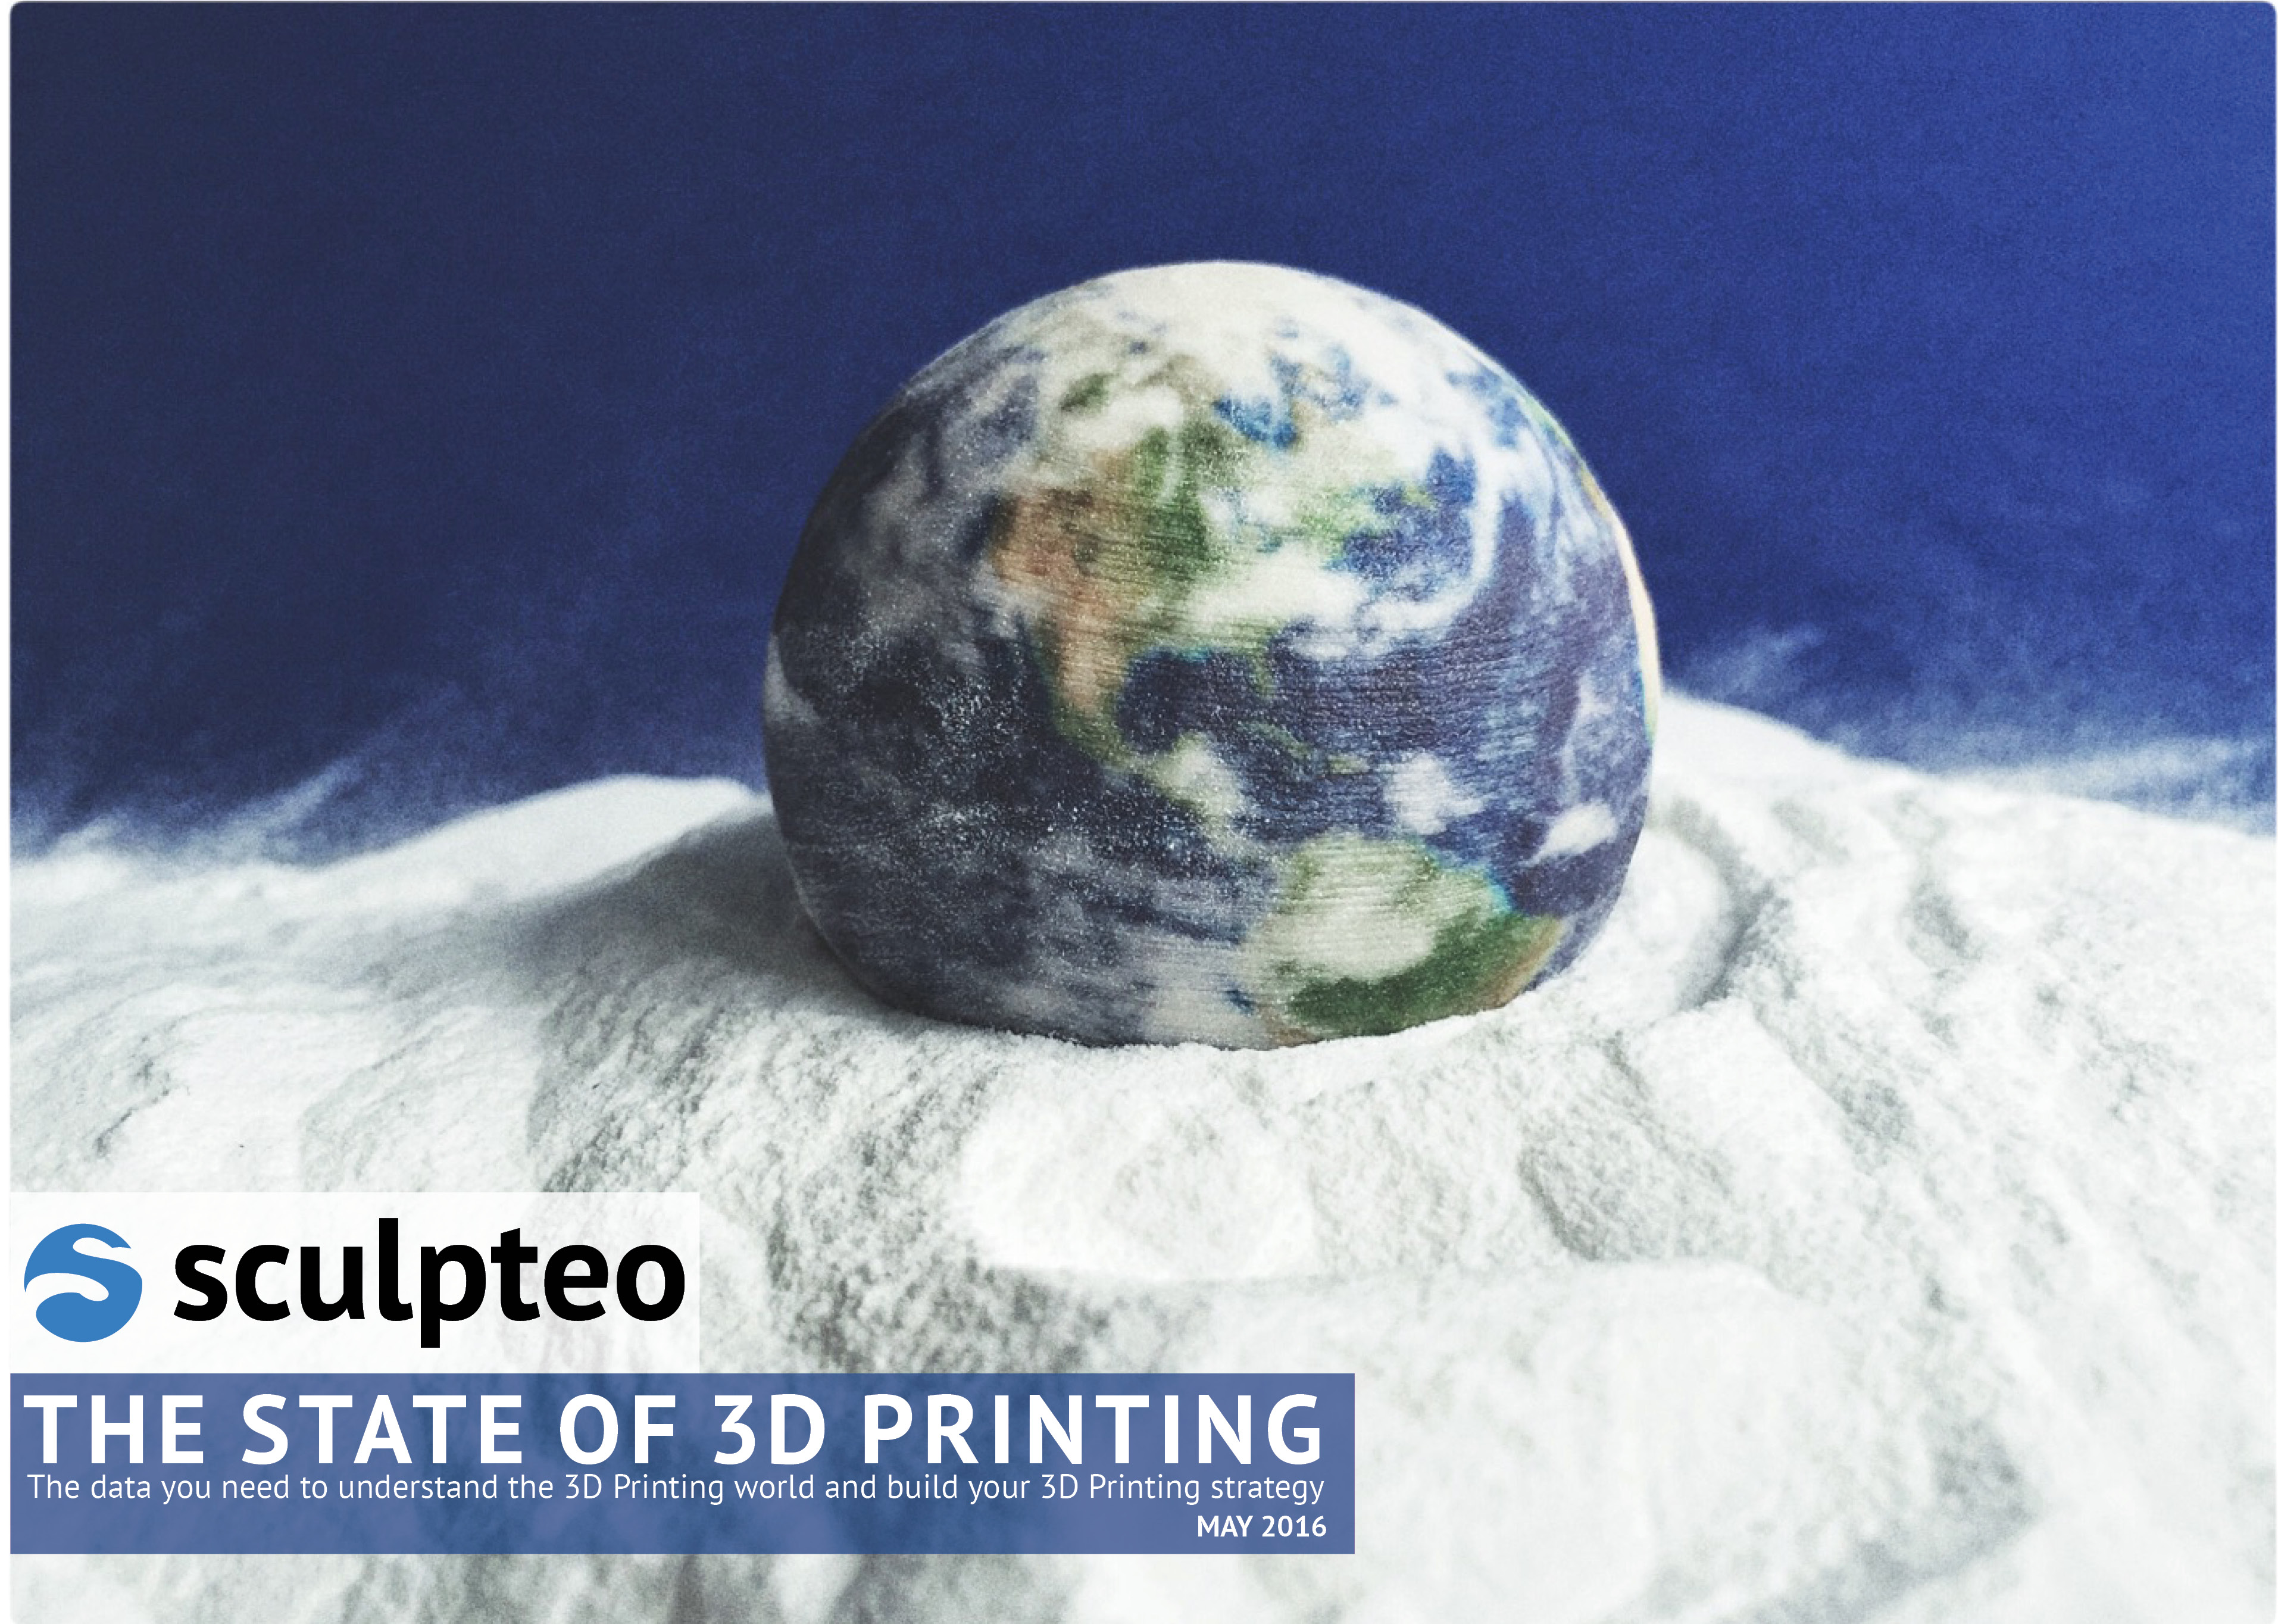 The State of 3D Printing 2016 : zoom in